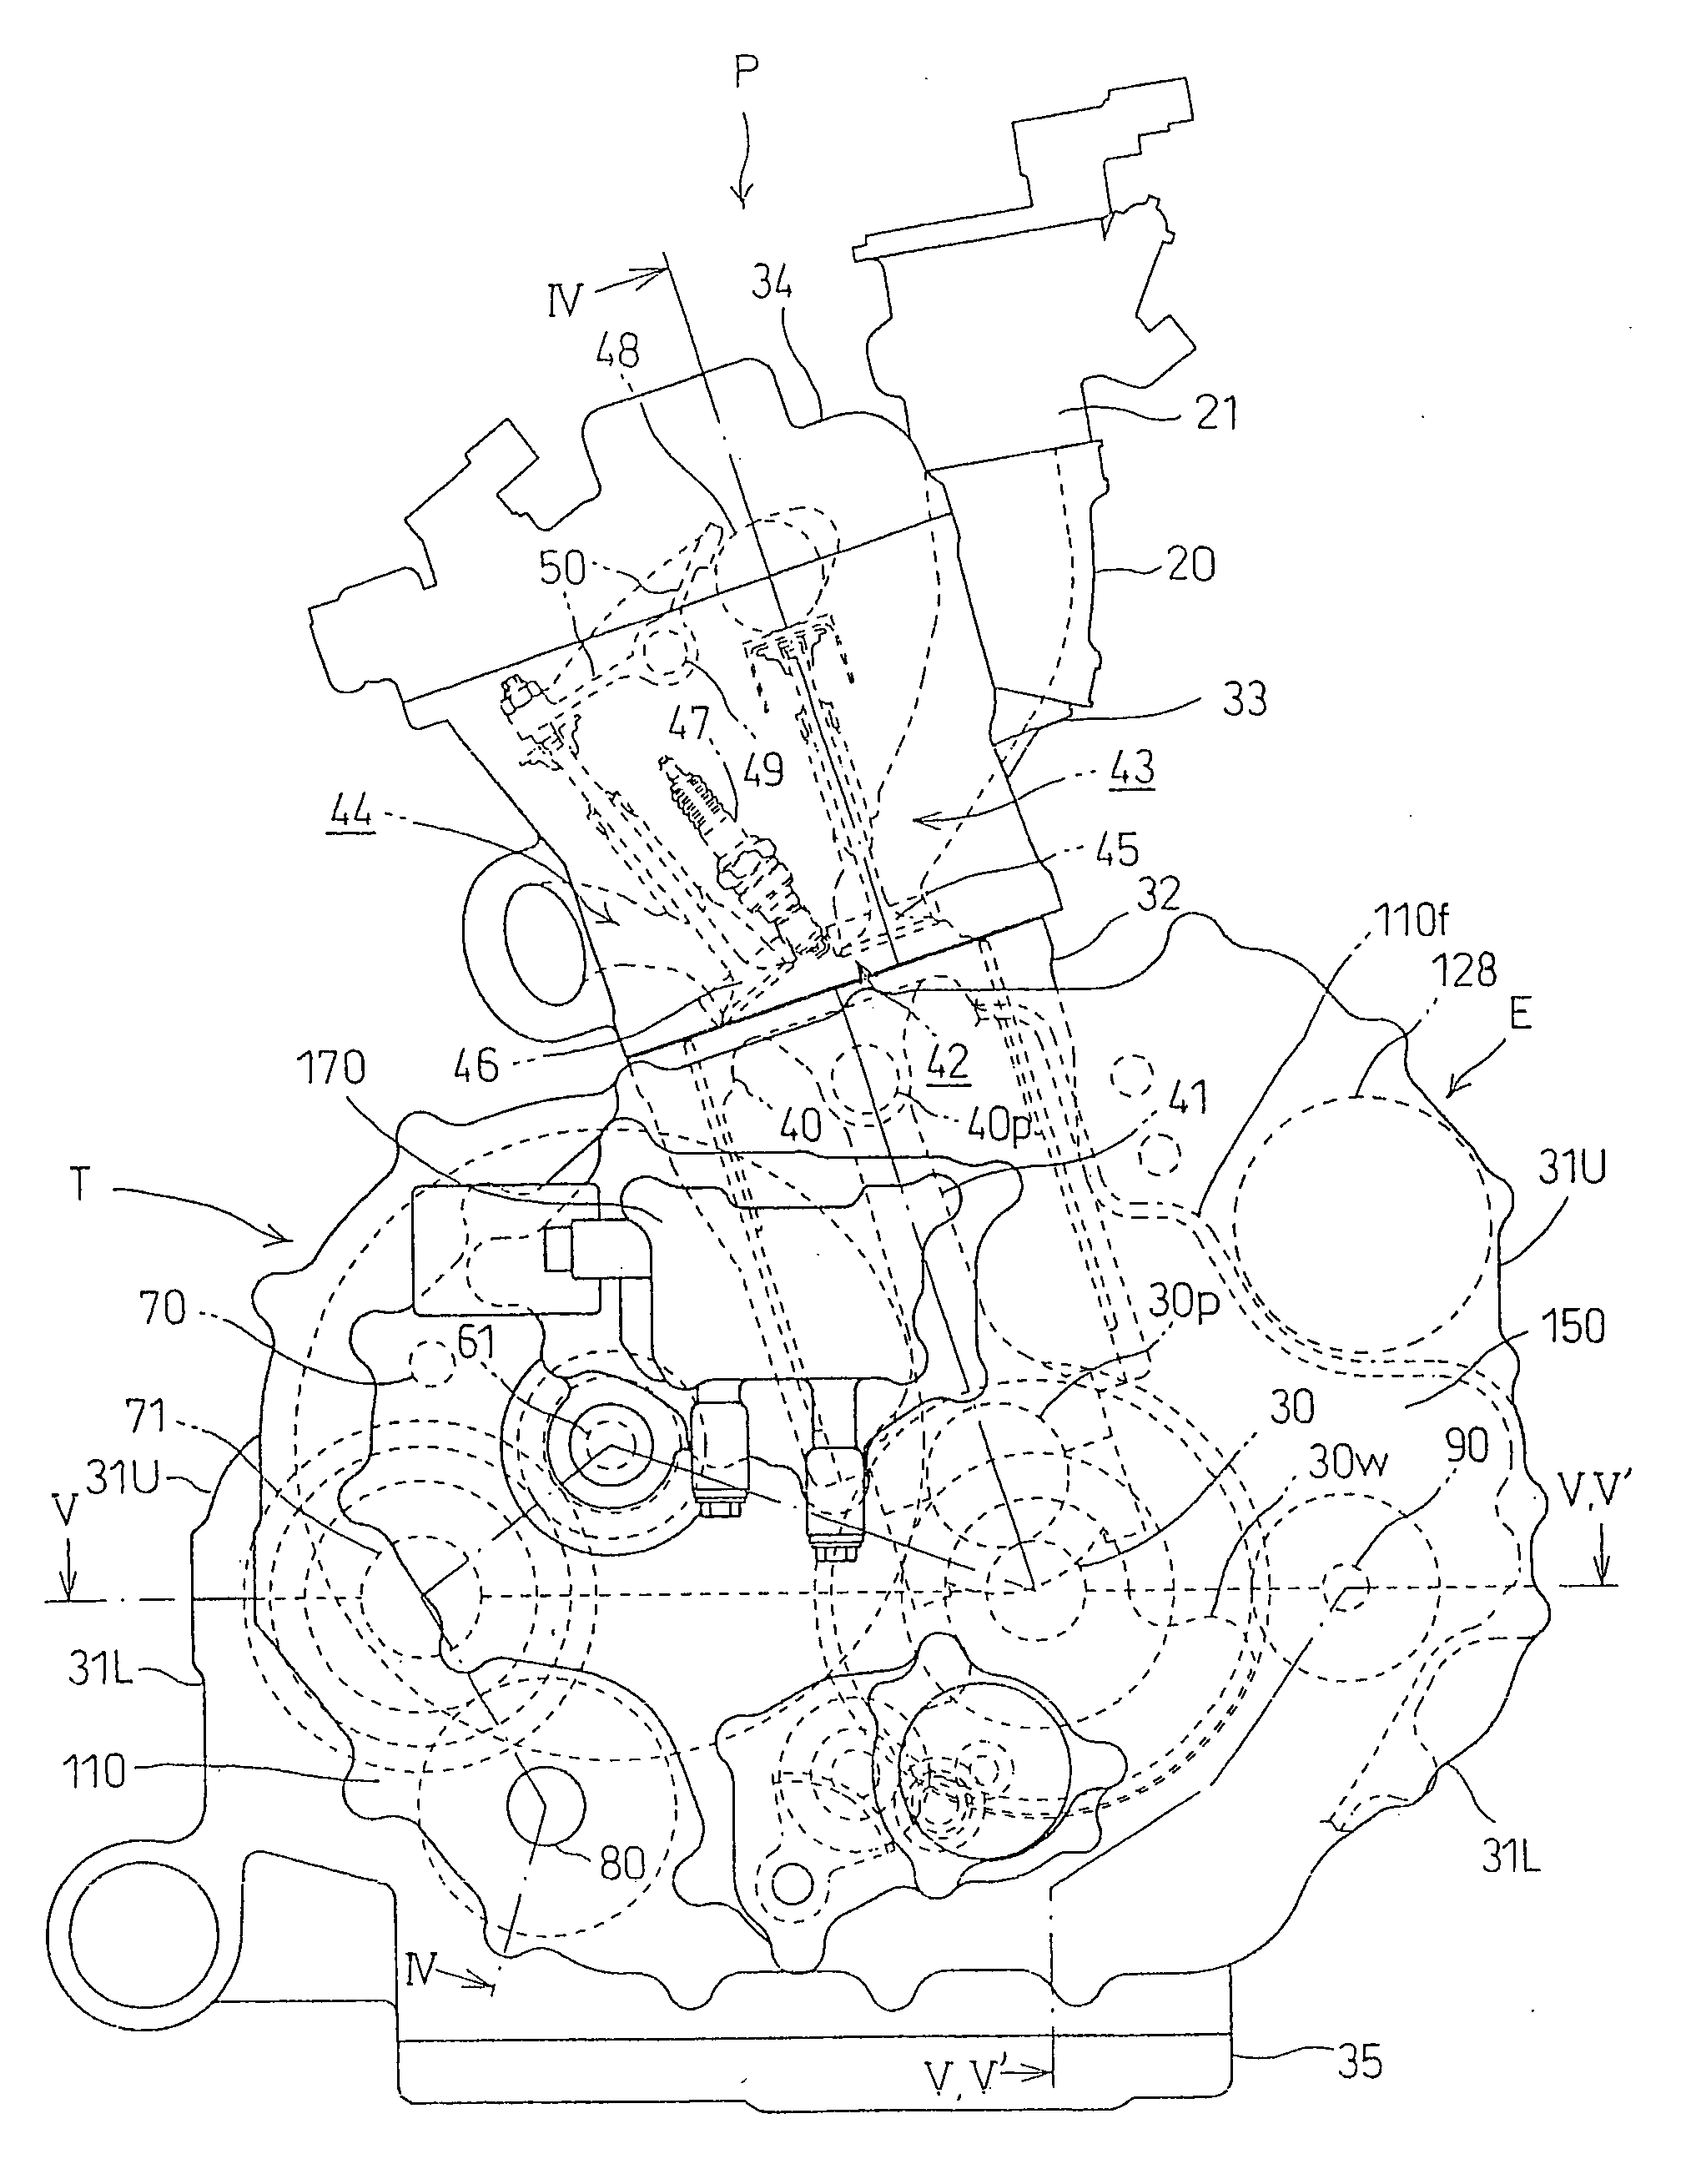 Oil filter mounting structure in internal combustion engine